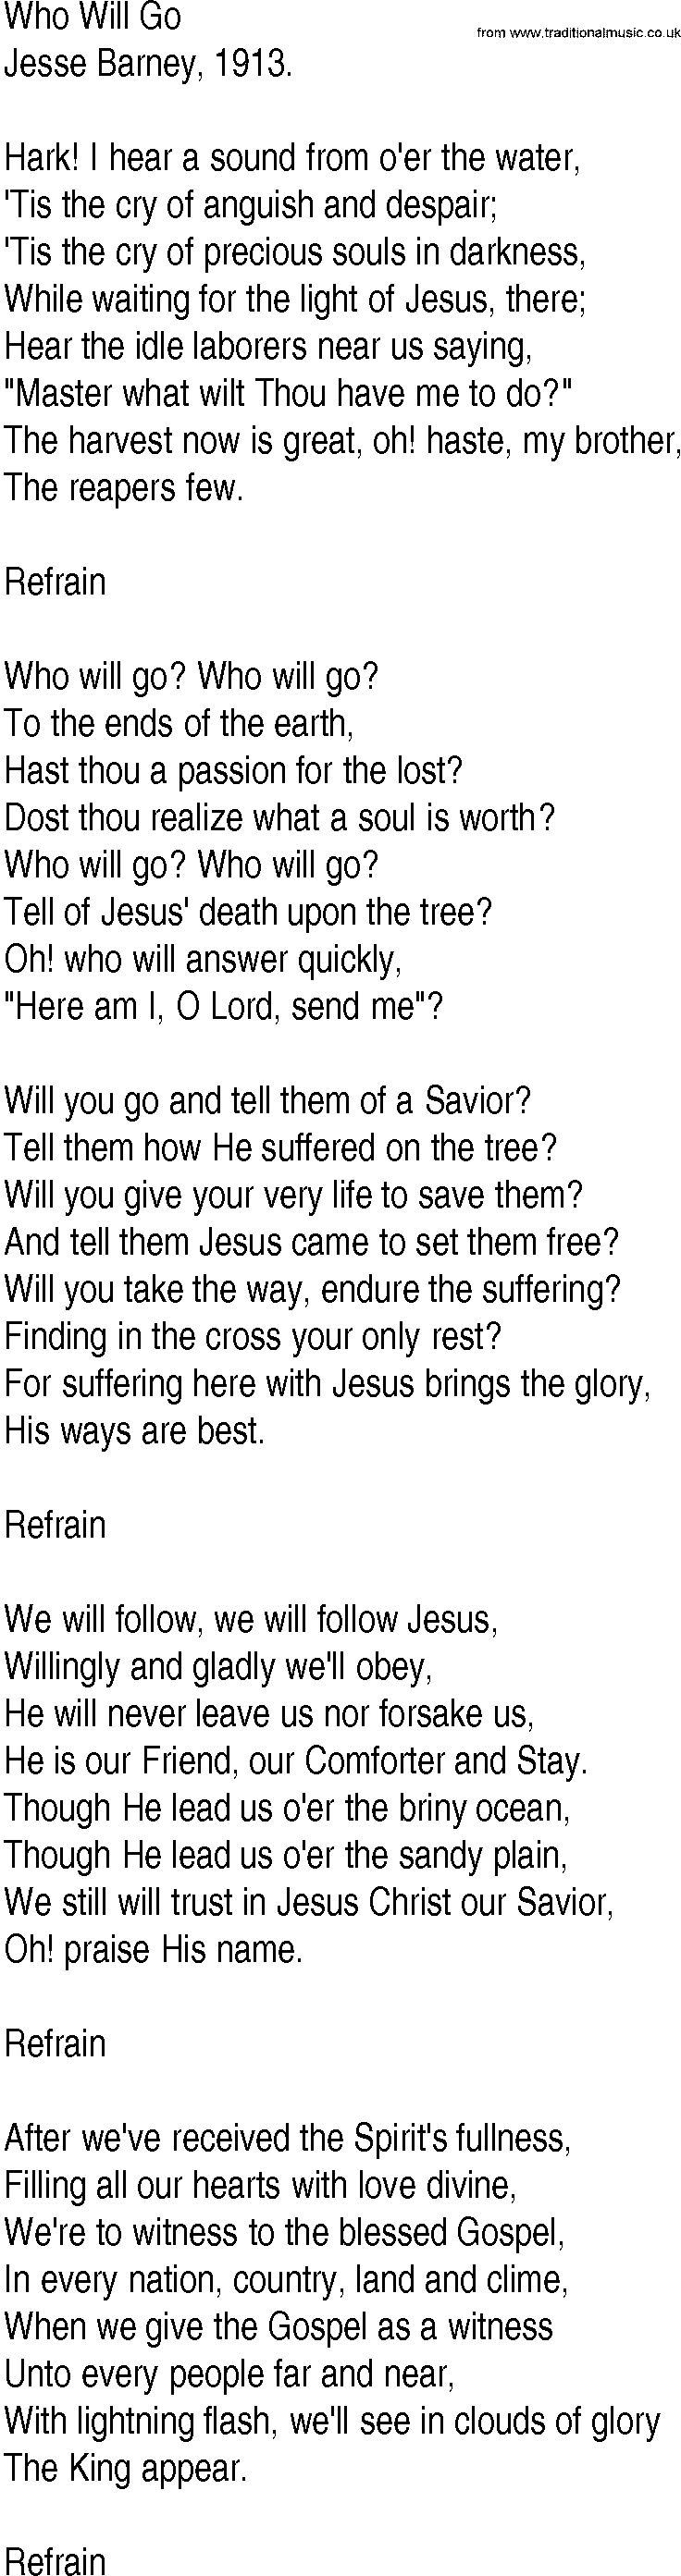 Hymn and Gospel Song: Who Will Go by Jesse Barney lyrics